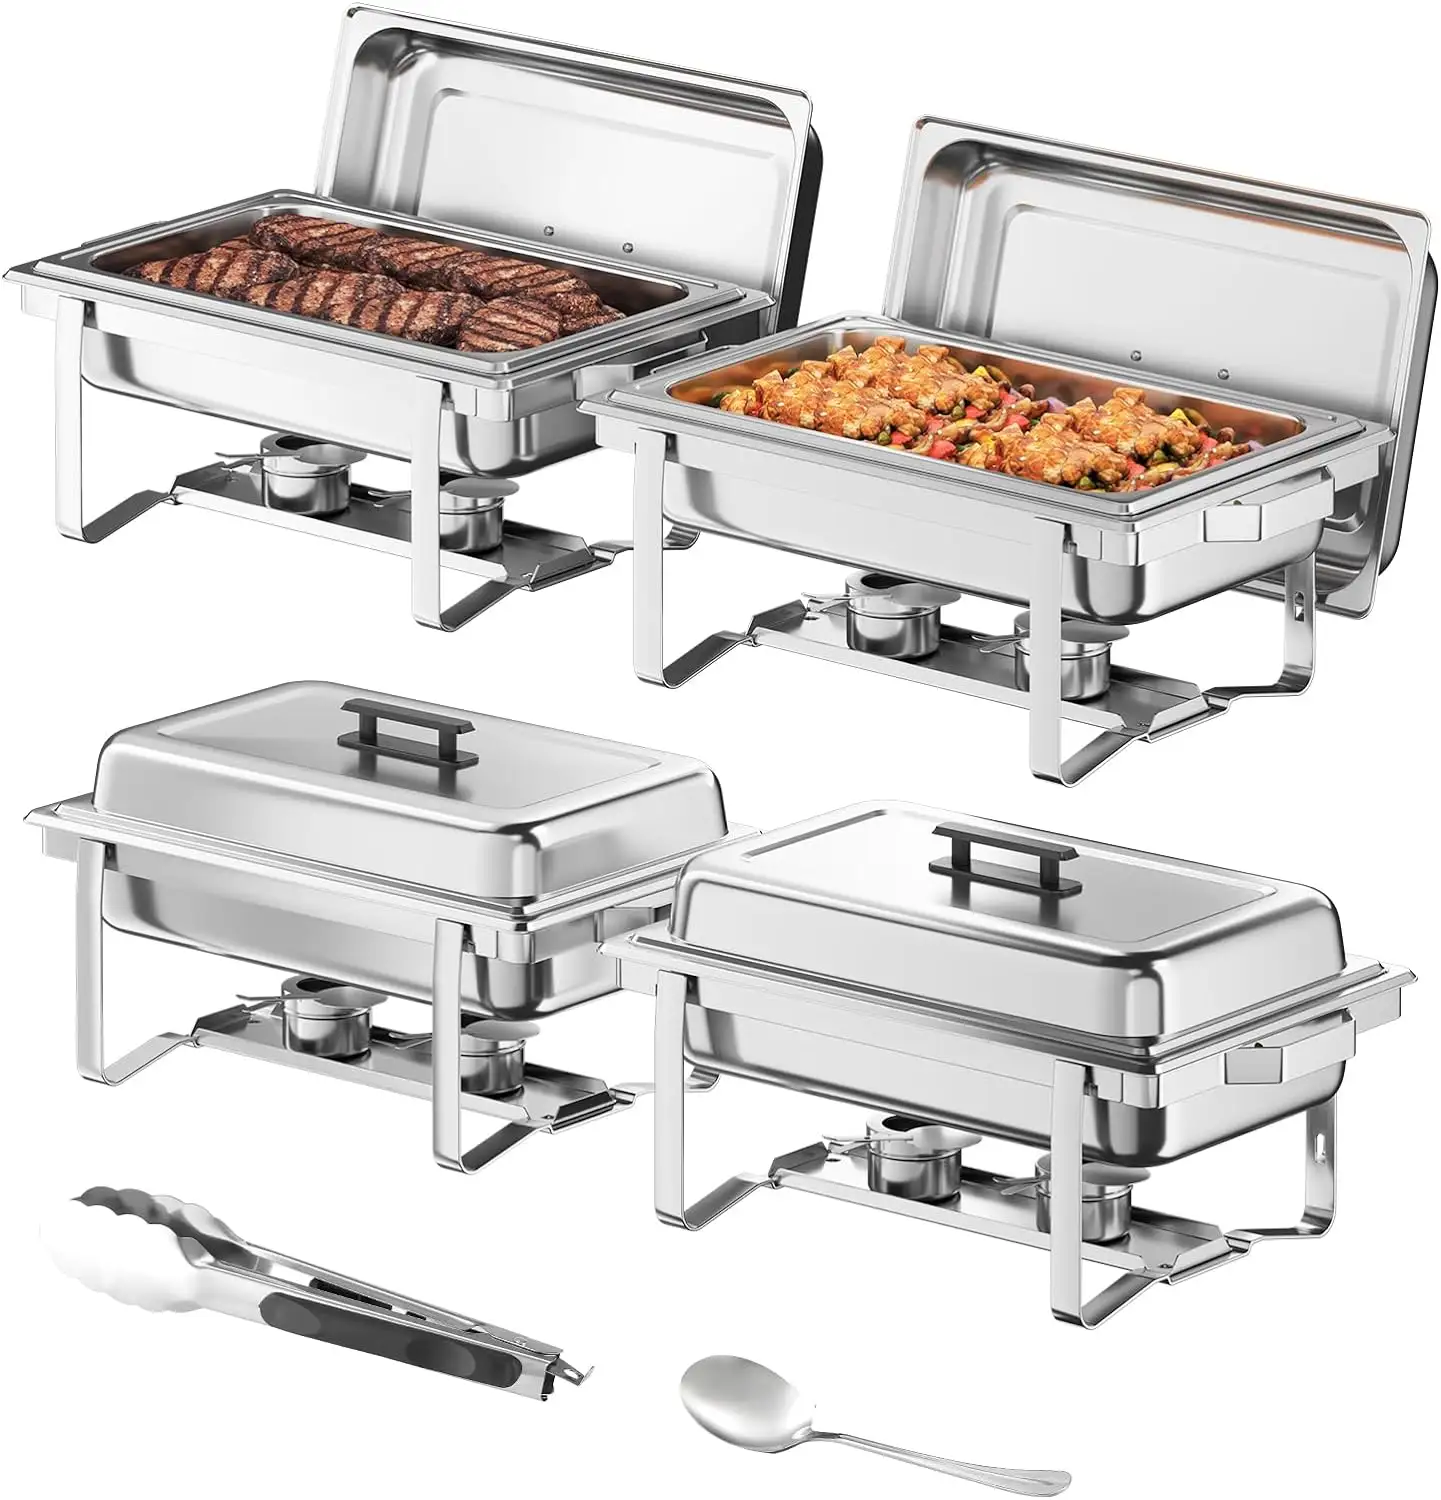 9 QT Silver Hotel Party accessary Stainless Steel Catering Chafer Food Warmer Set Chafing Dish Buffet Set